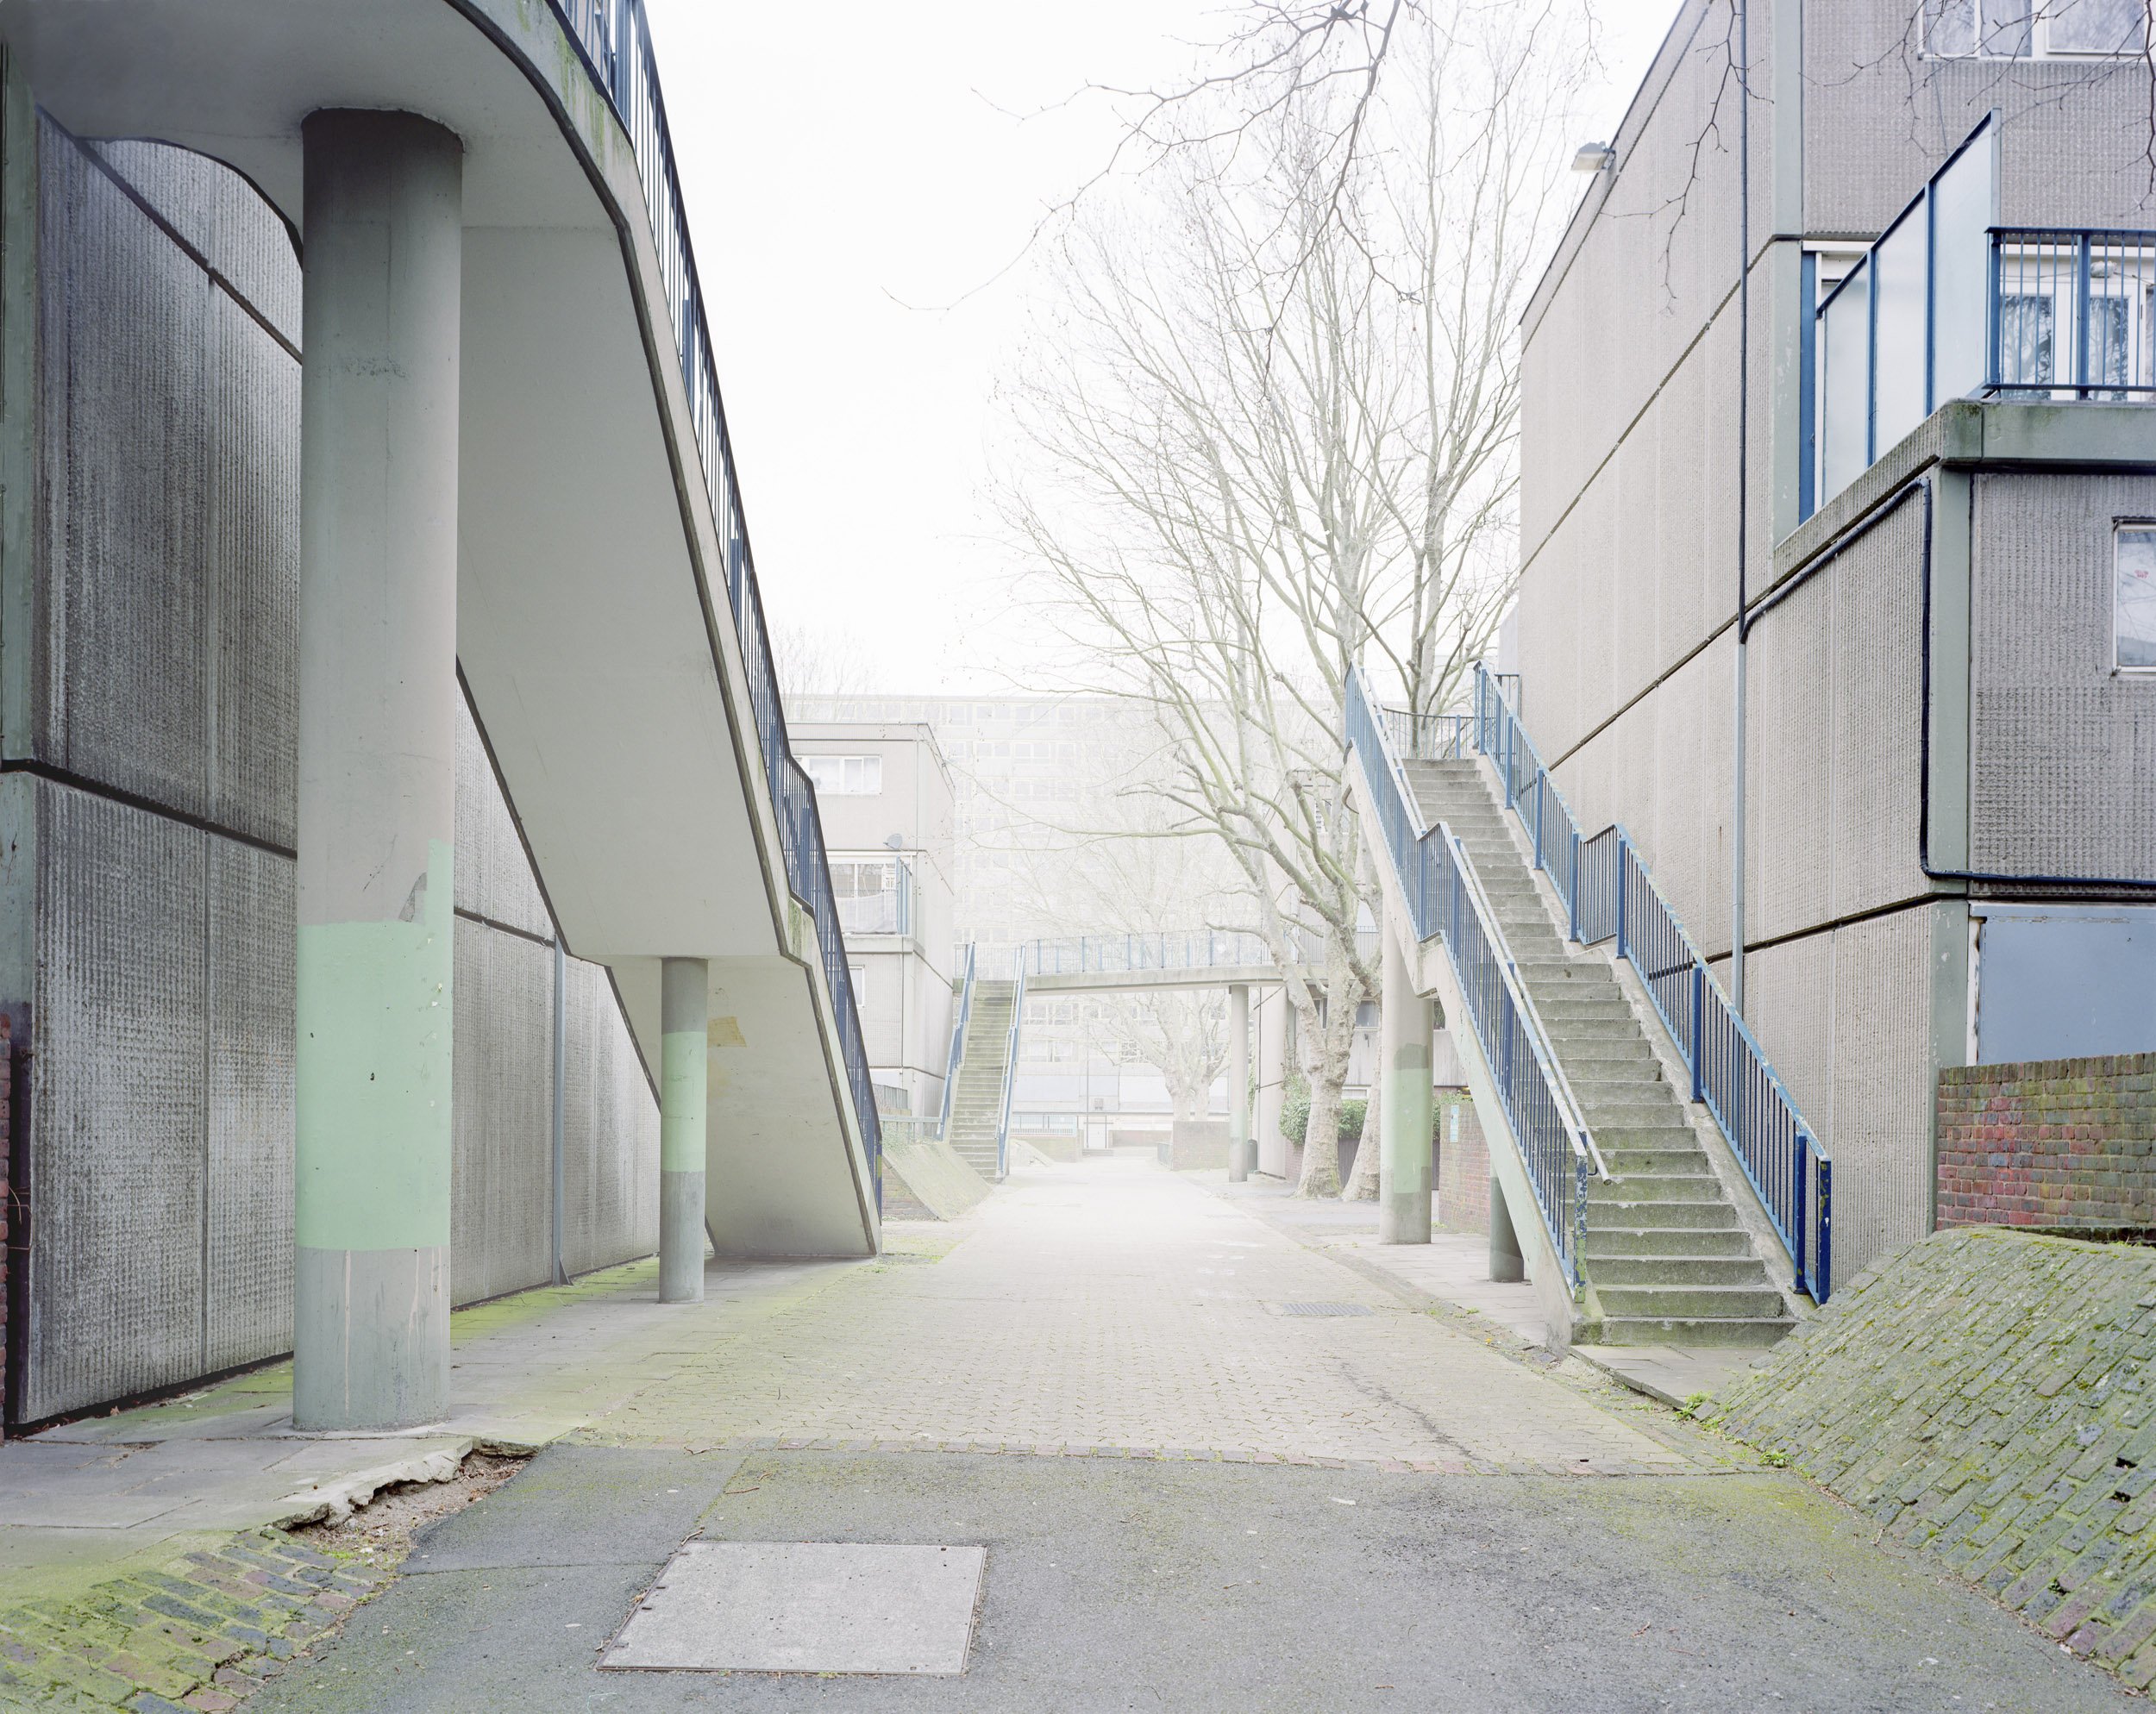 heygate-abstracted-simon-kennedy-mass-collective-photography-architecture-00011.jpg